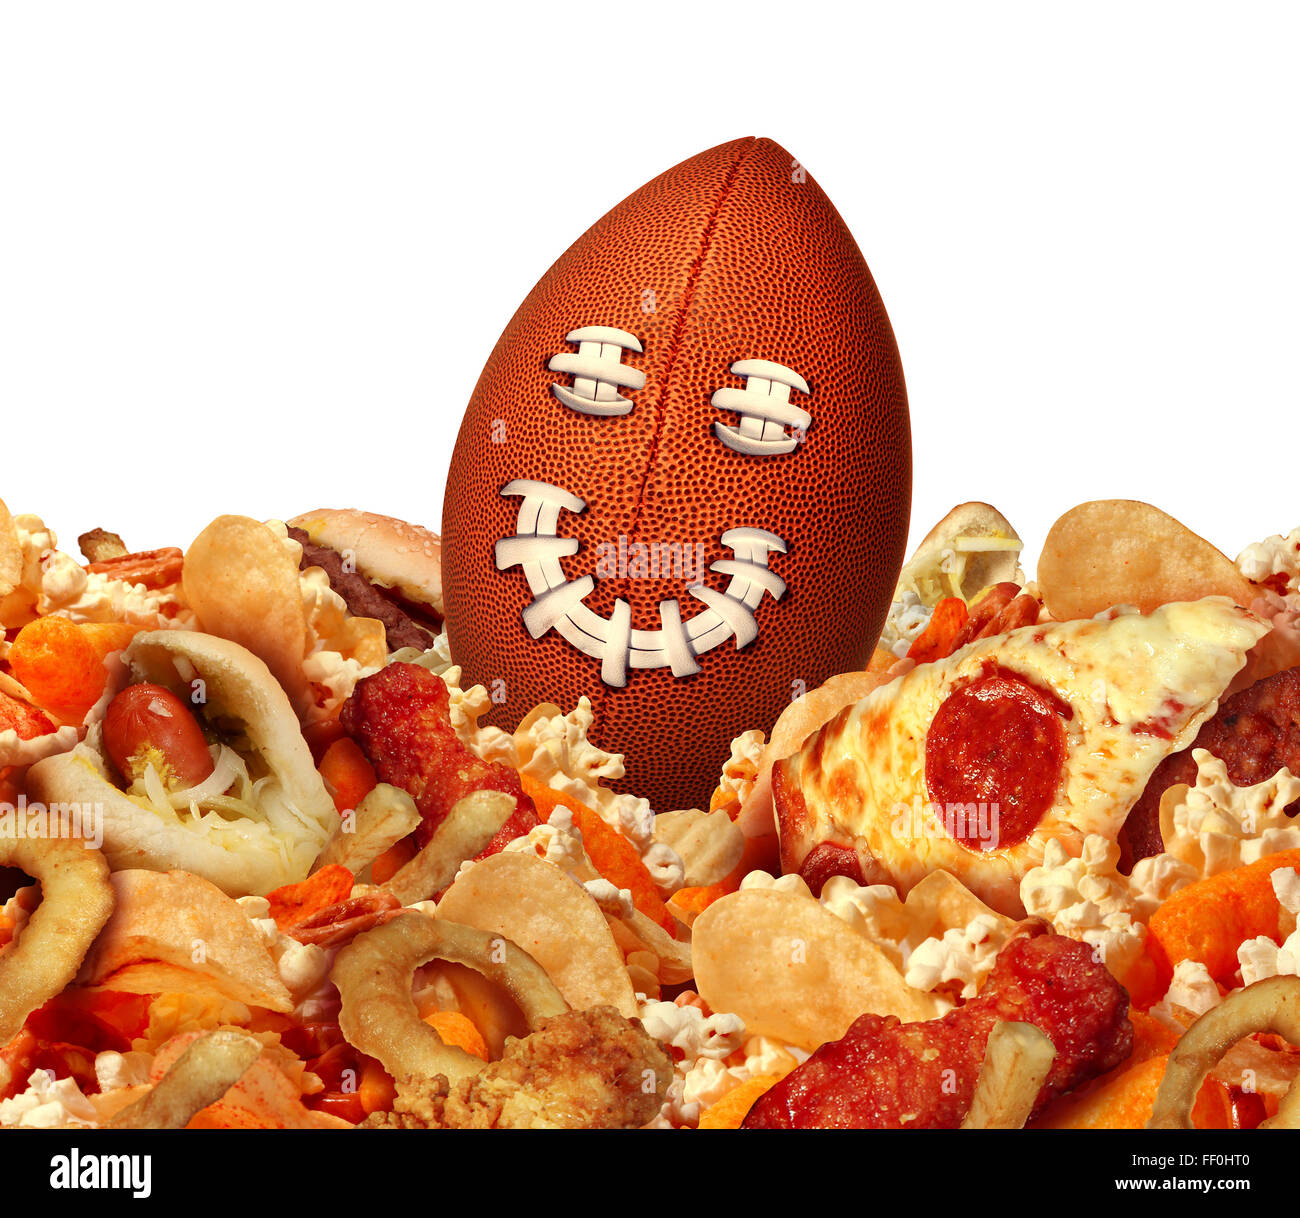 Football game party snack time and tailgating food concept as a ball with a smiling face sitting in a group of game day snacks as chips chicken wings for a celebration on tv watching of the championship match. Stock Photo